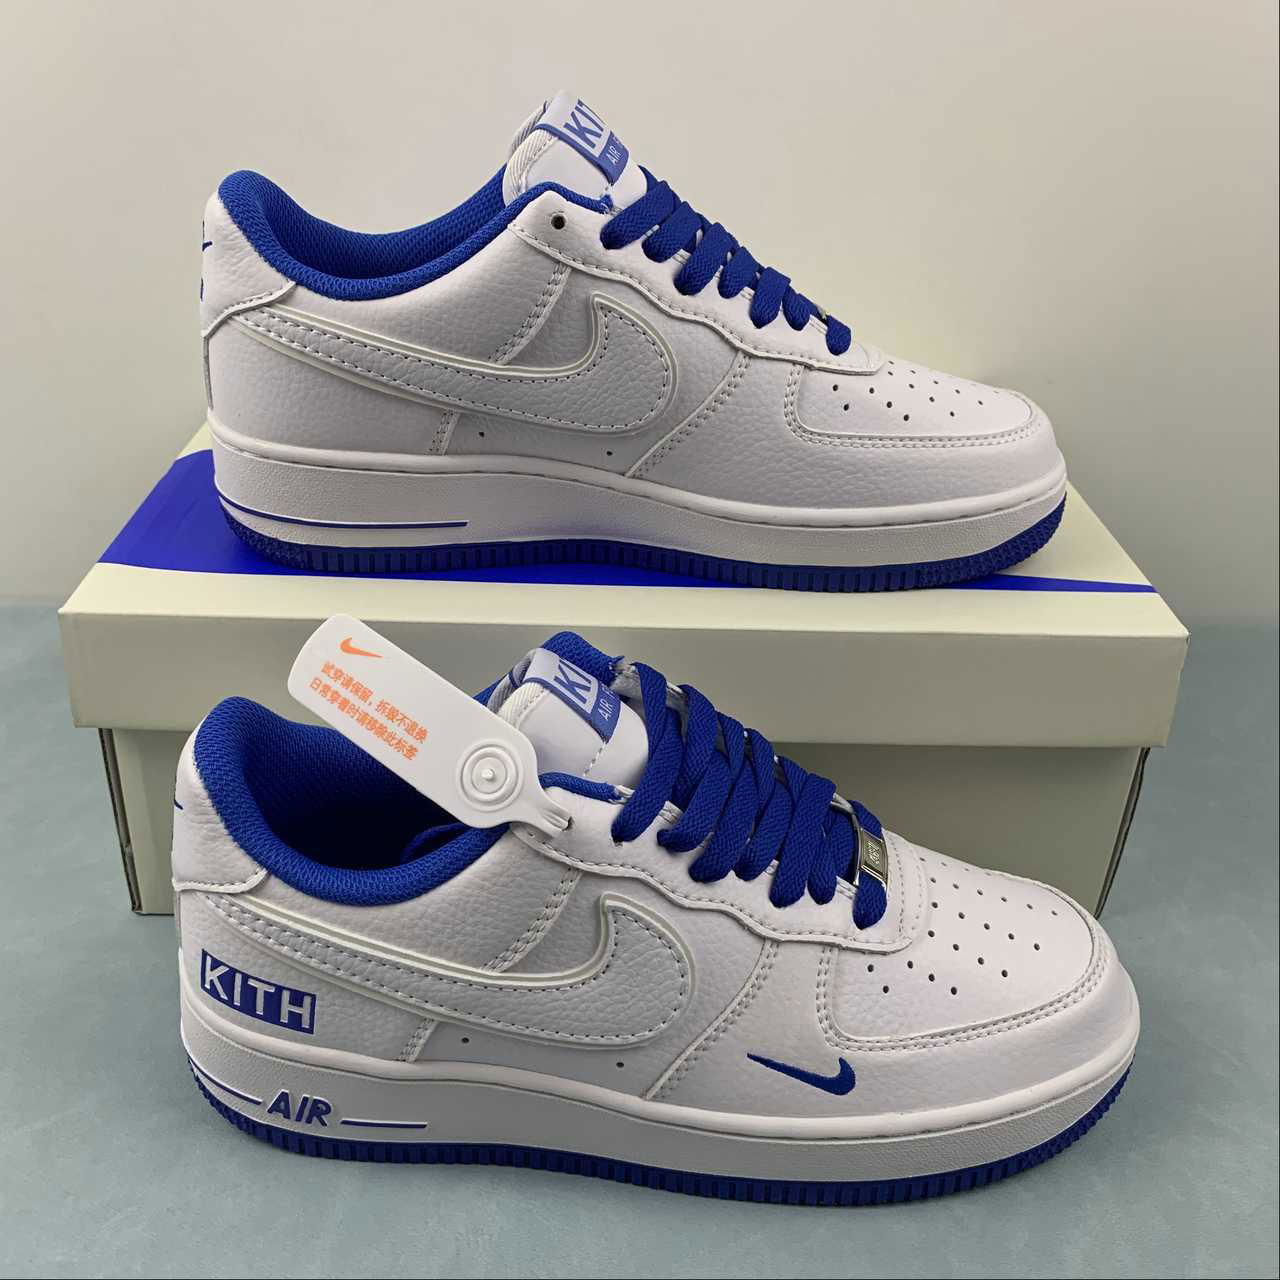      AIR FORCE 1 Air Force low-top casual shoes KT1659-005